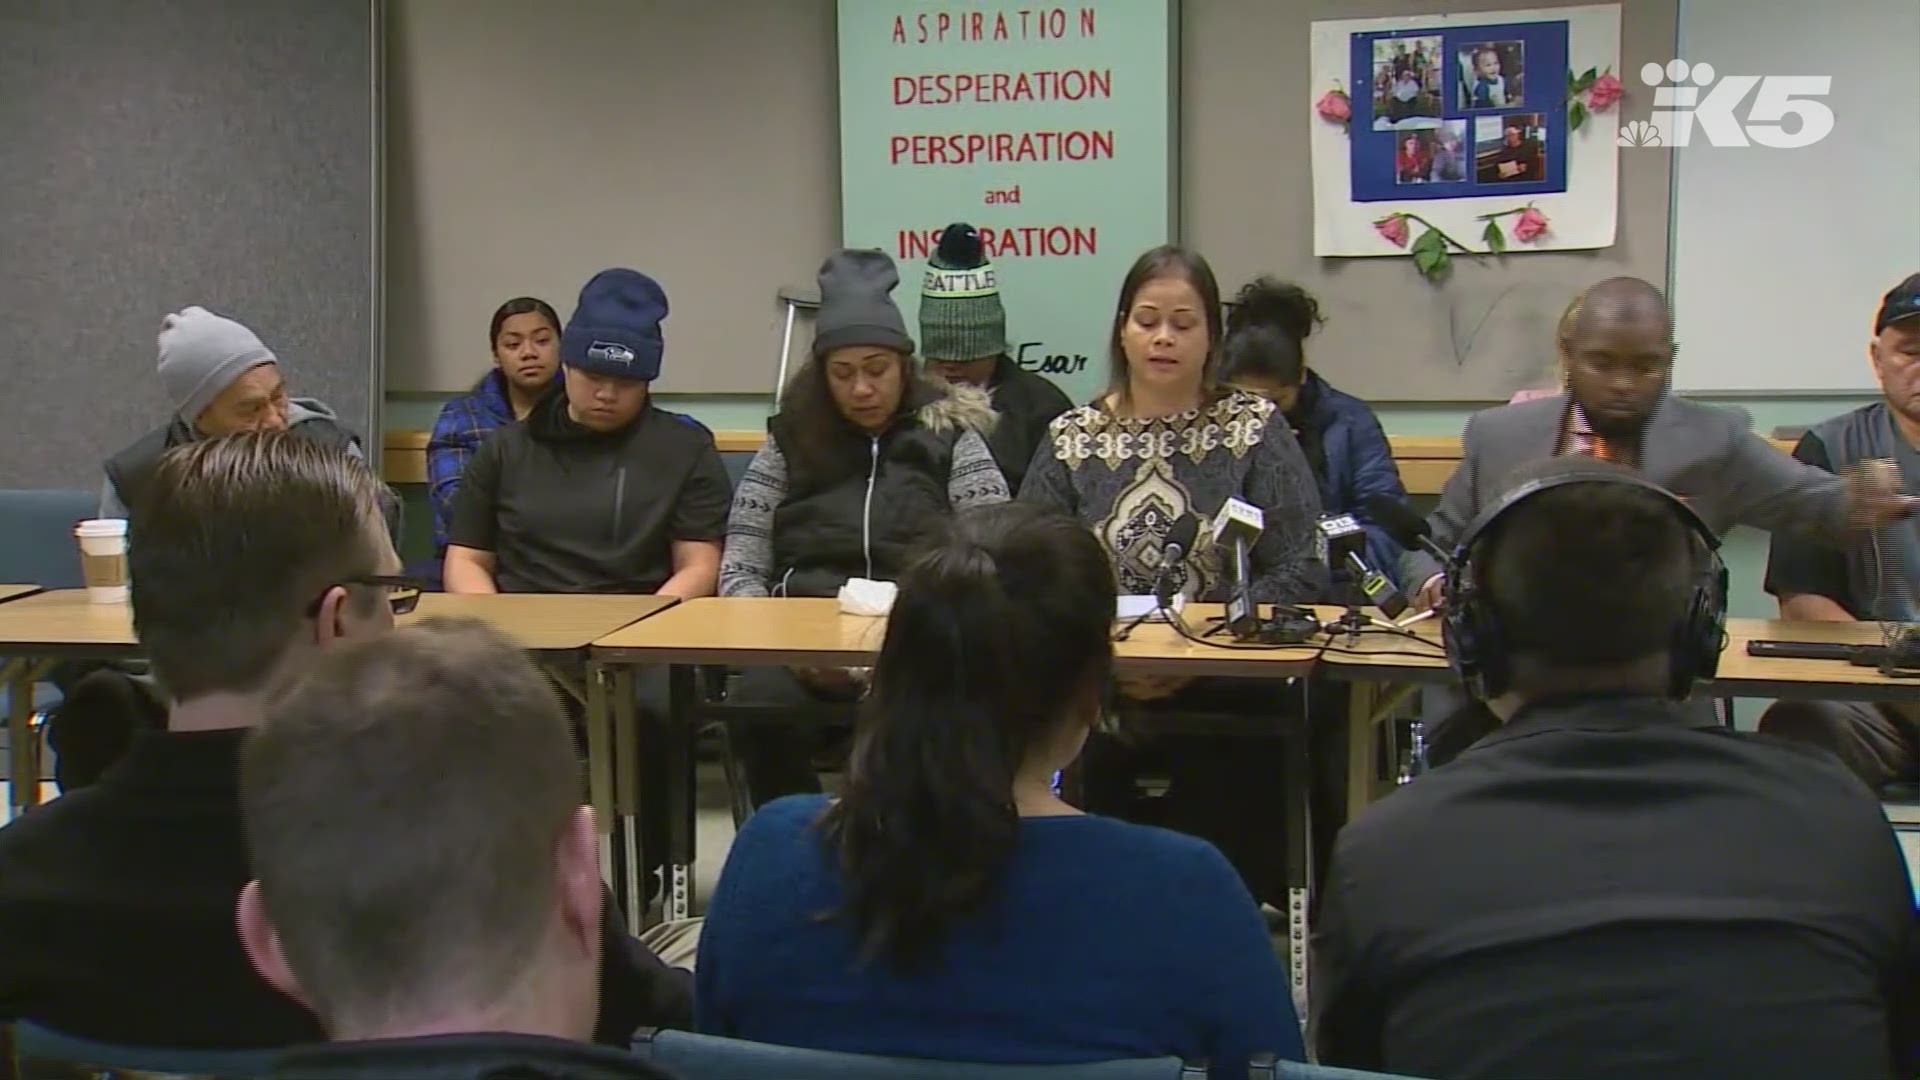 Kerina Ngauamo speaks at a press conference after her nephew Iosia Faletogo was killed in an officer-involved shooting in North Seattle on New Year's Eve